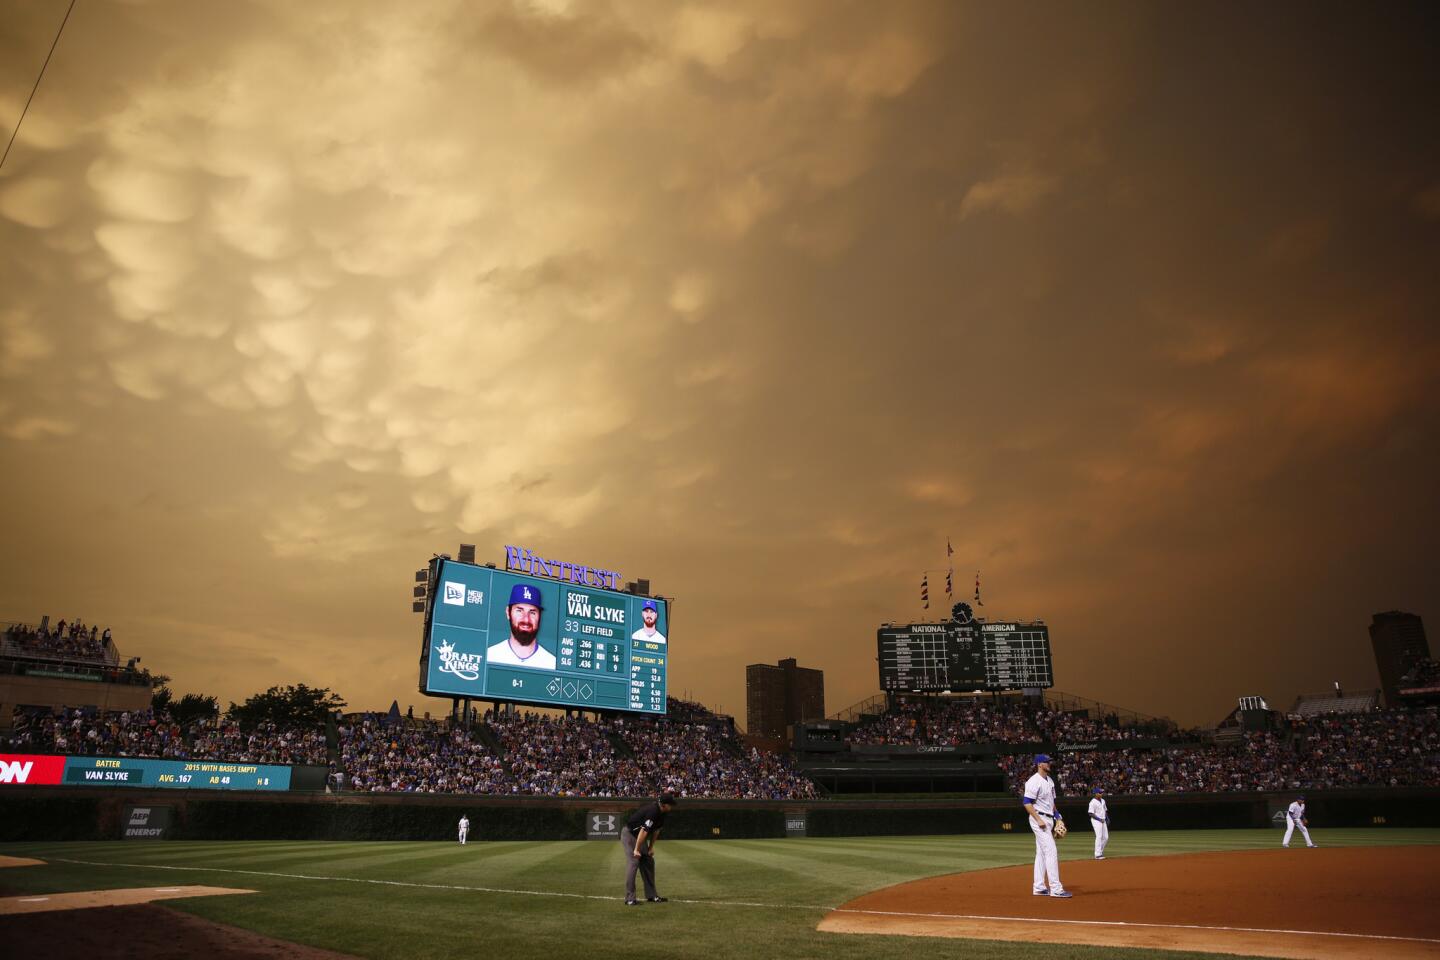 Storm clouds begin to roll in as the sun set during the game.